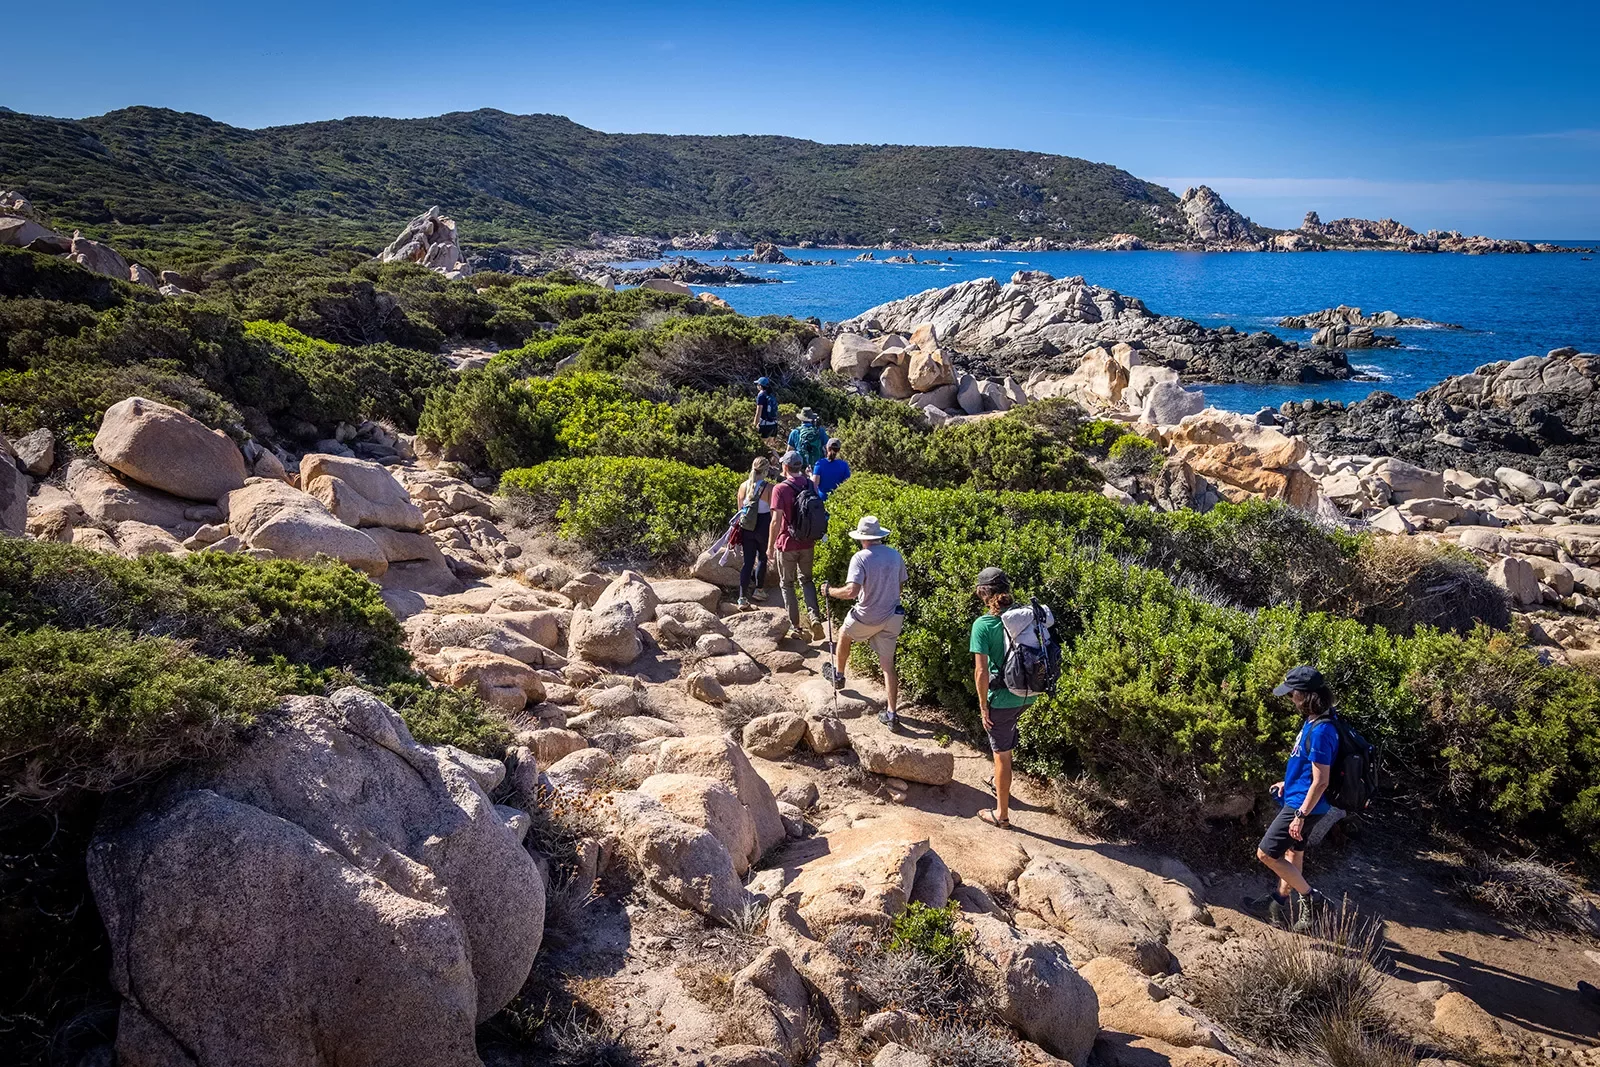 Eight guests hiking on rocky shore, ocean to their right, hills in distance.